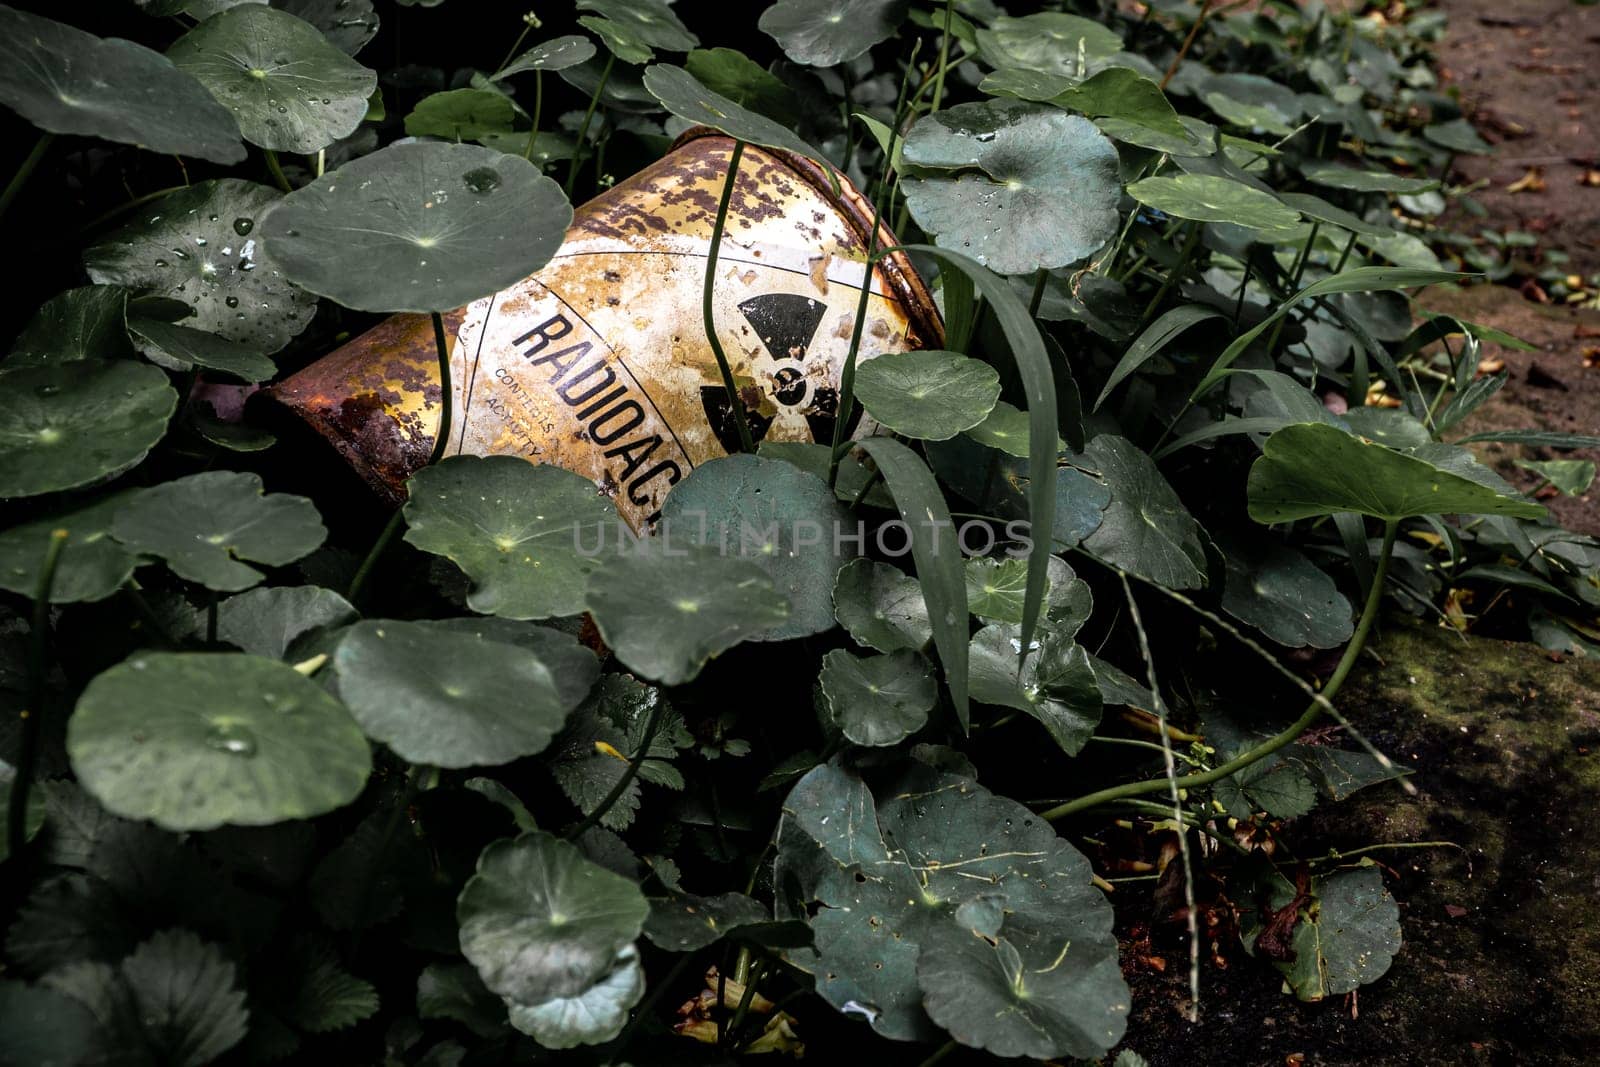 Industrial waste Radioactive material container left behind in the weeds by Satakorn